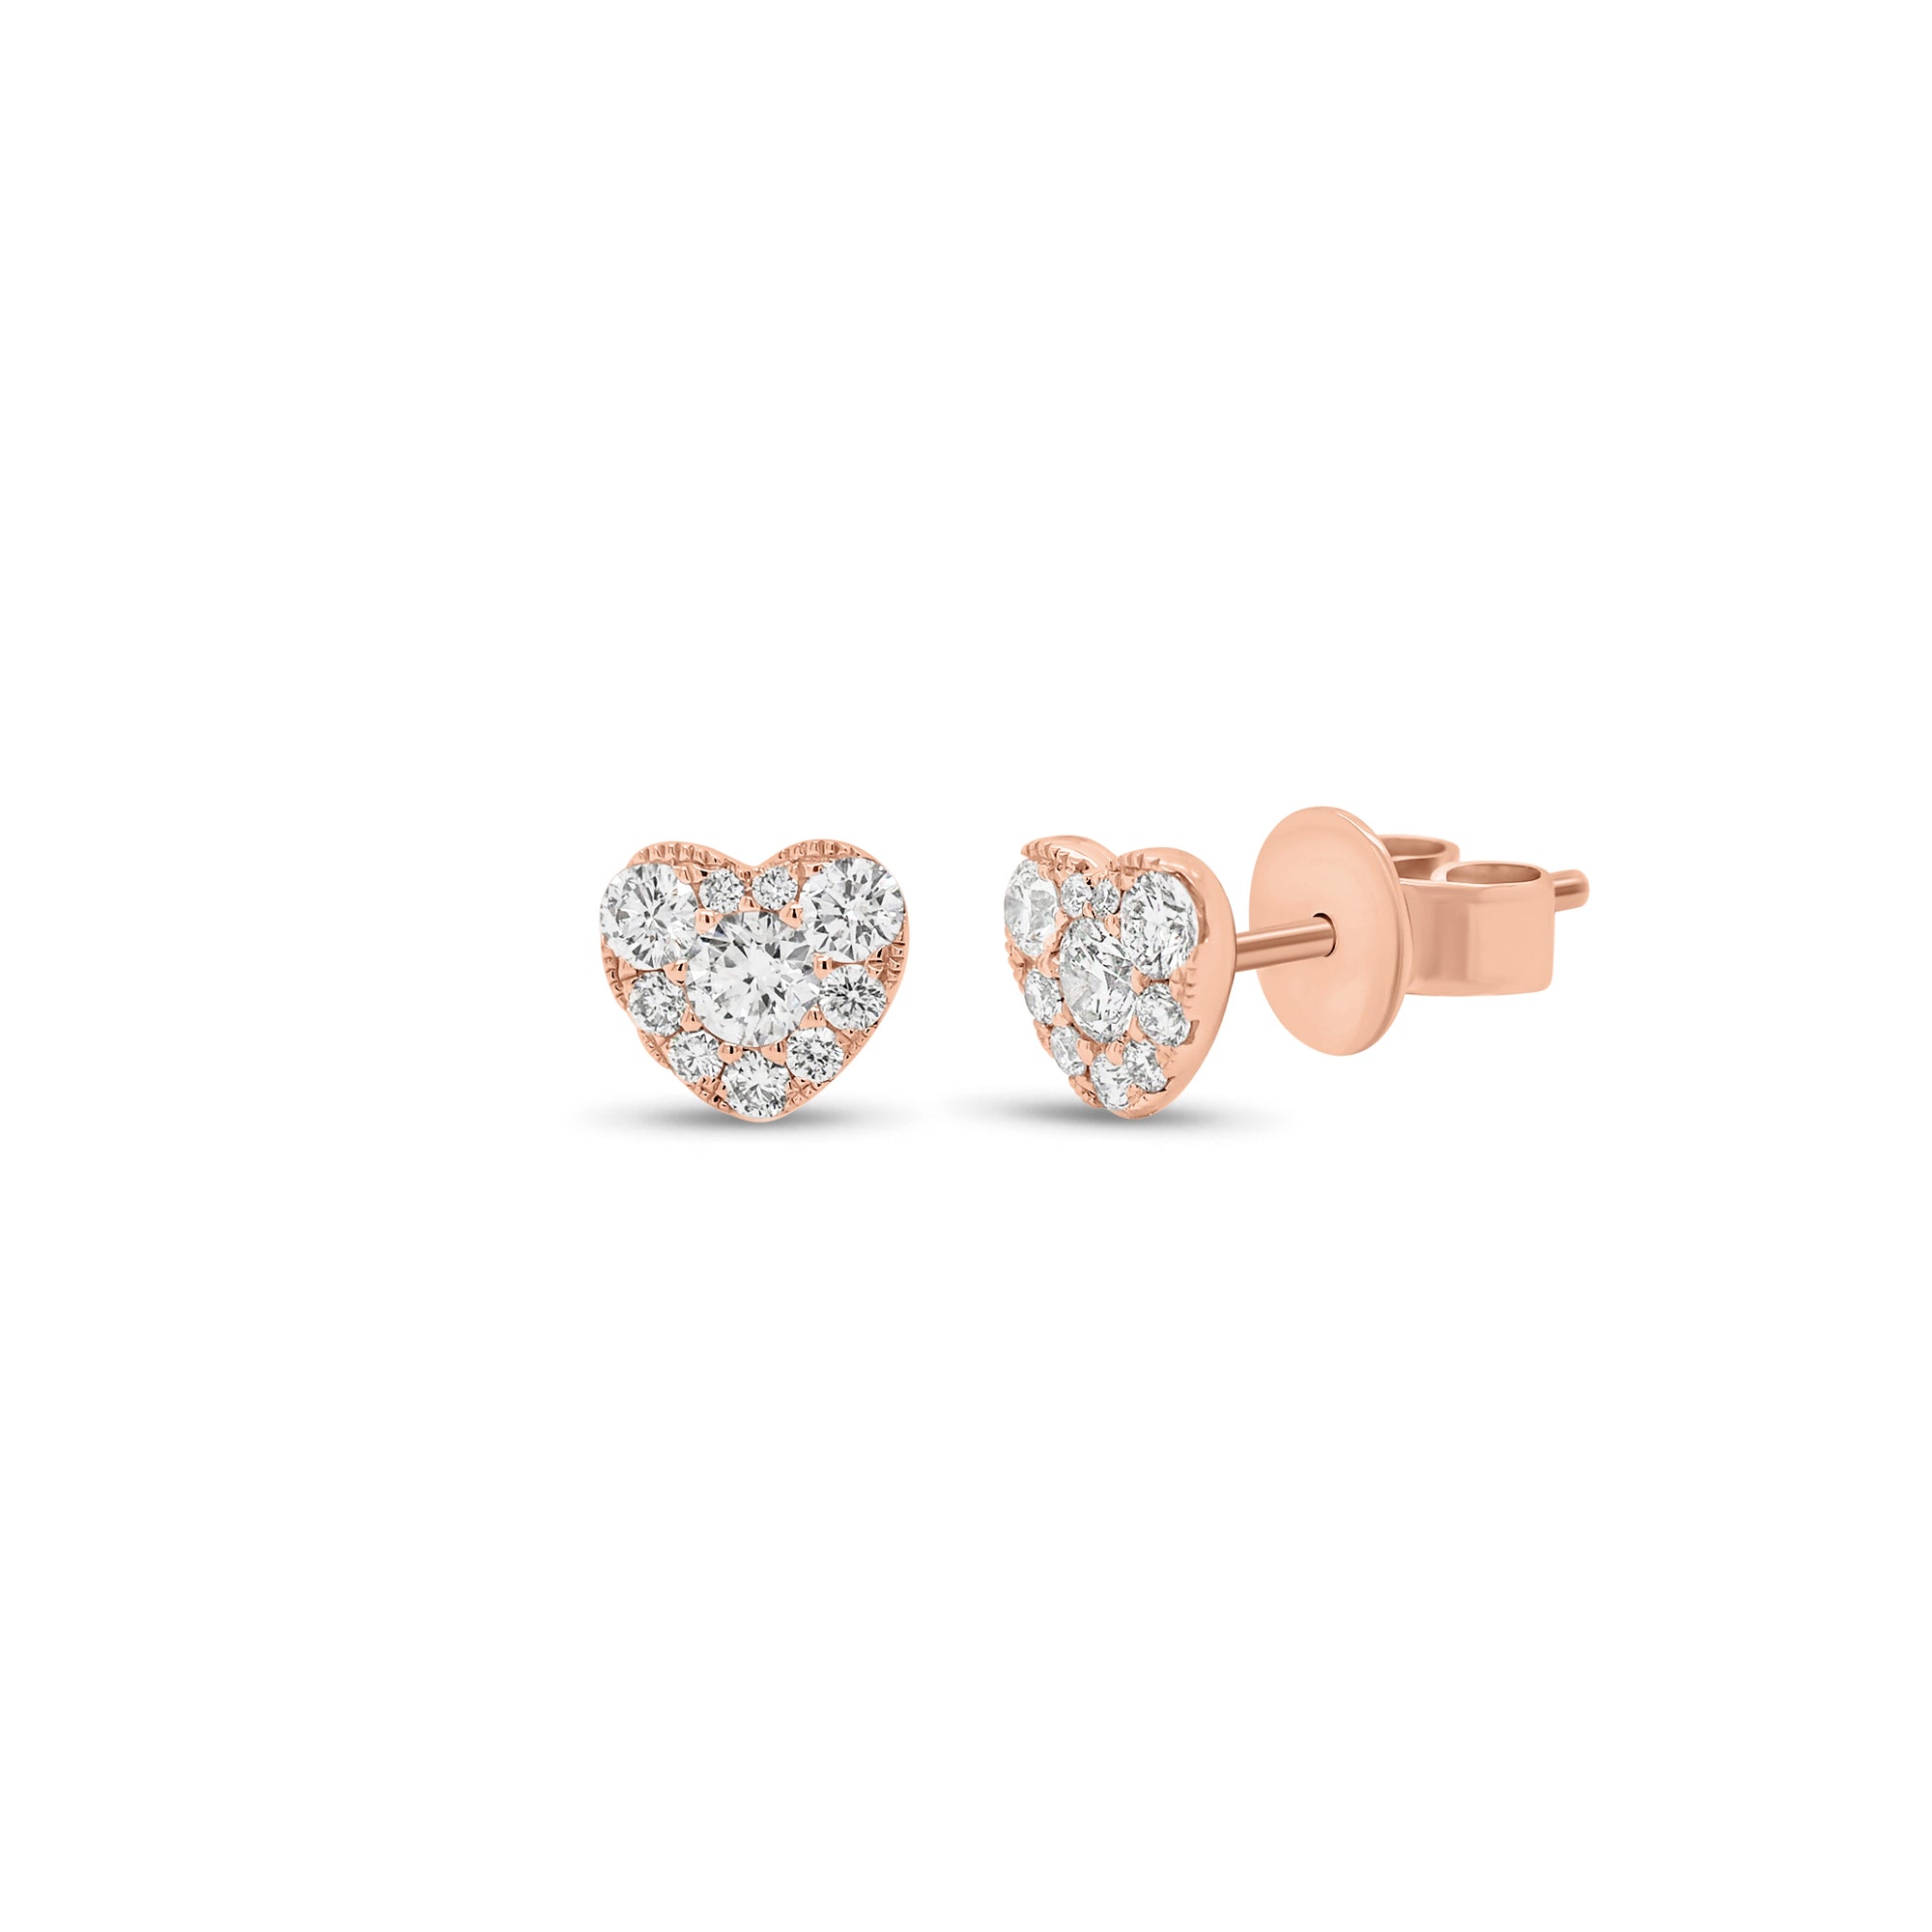 Diamond Cluster Heart Stud Earrings - 18K gold weighing 1.73 grams  - 20 round diamonds weighing 0.50 carats